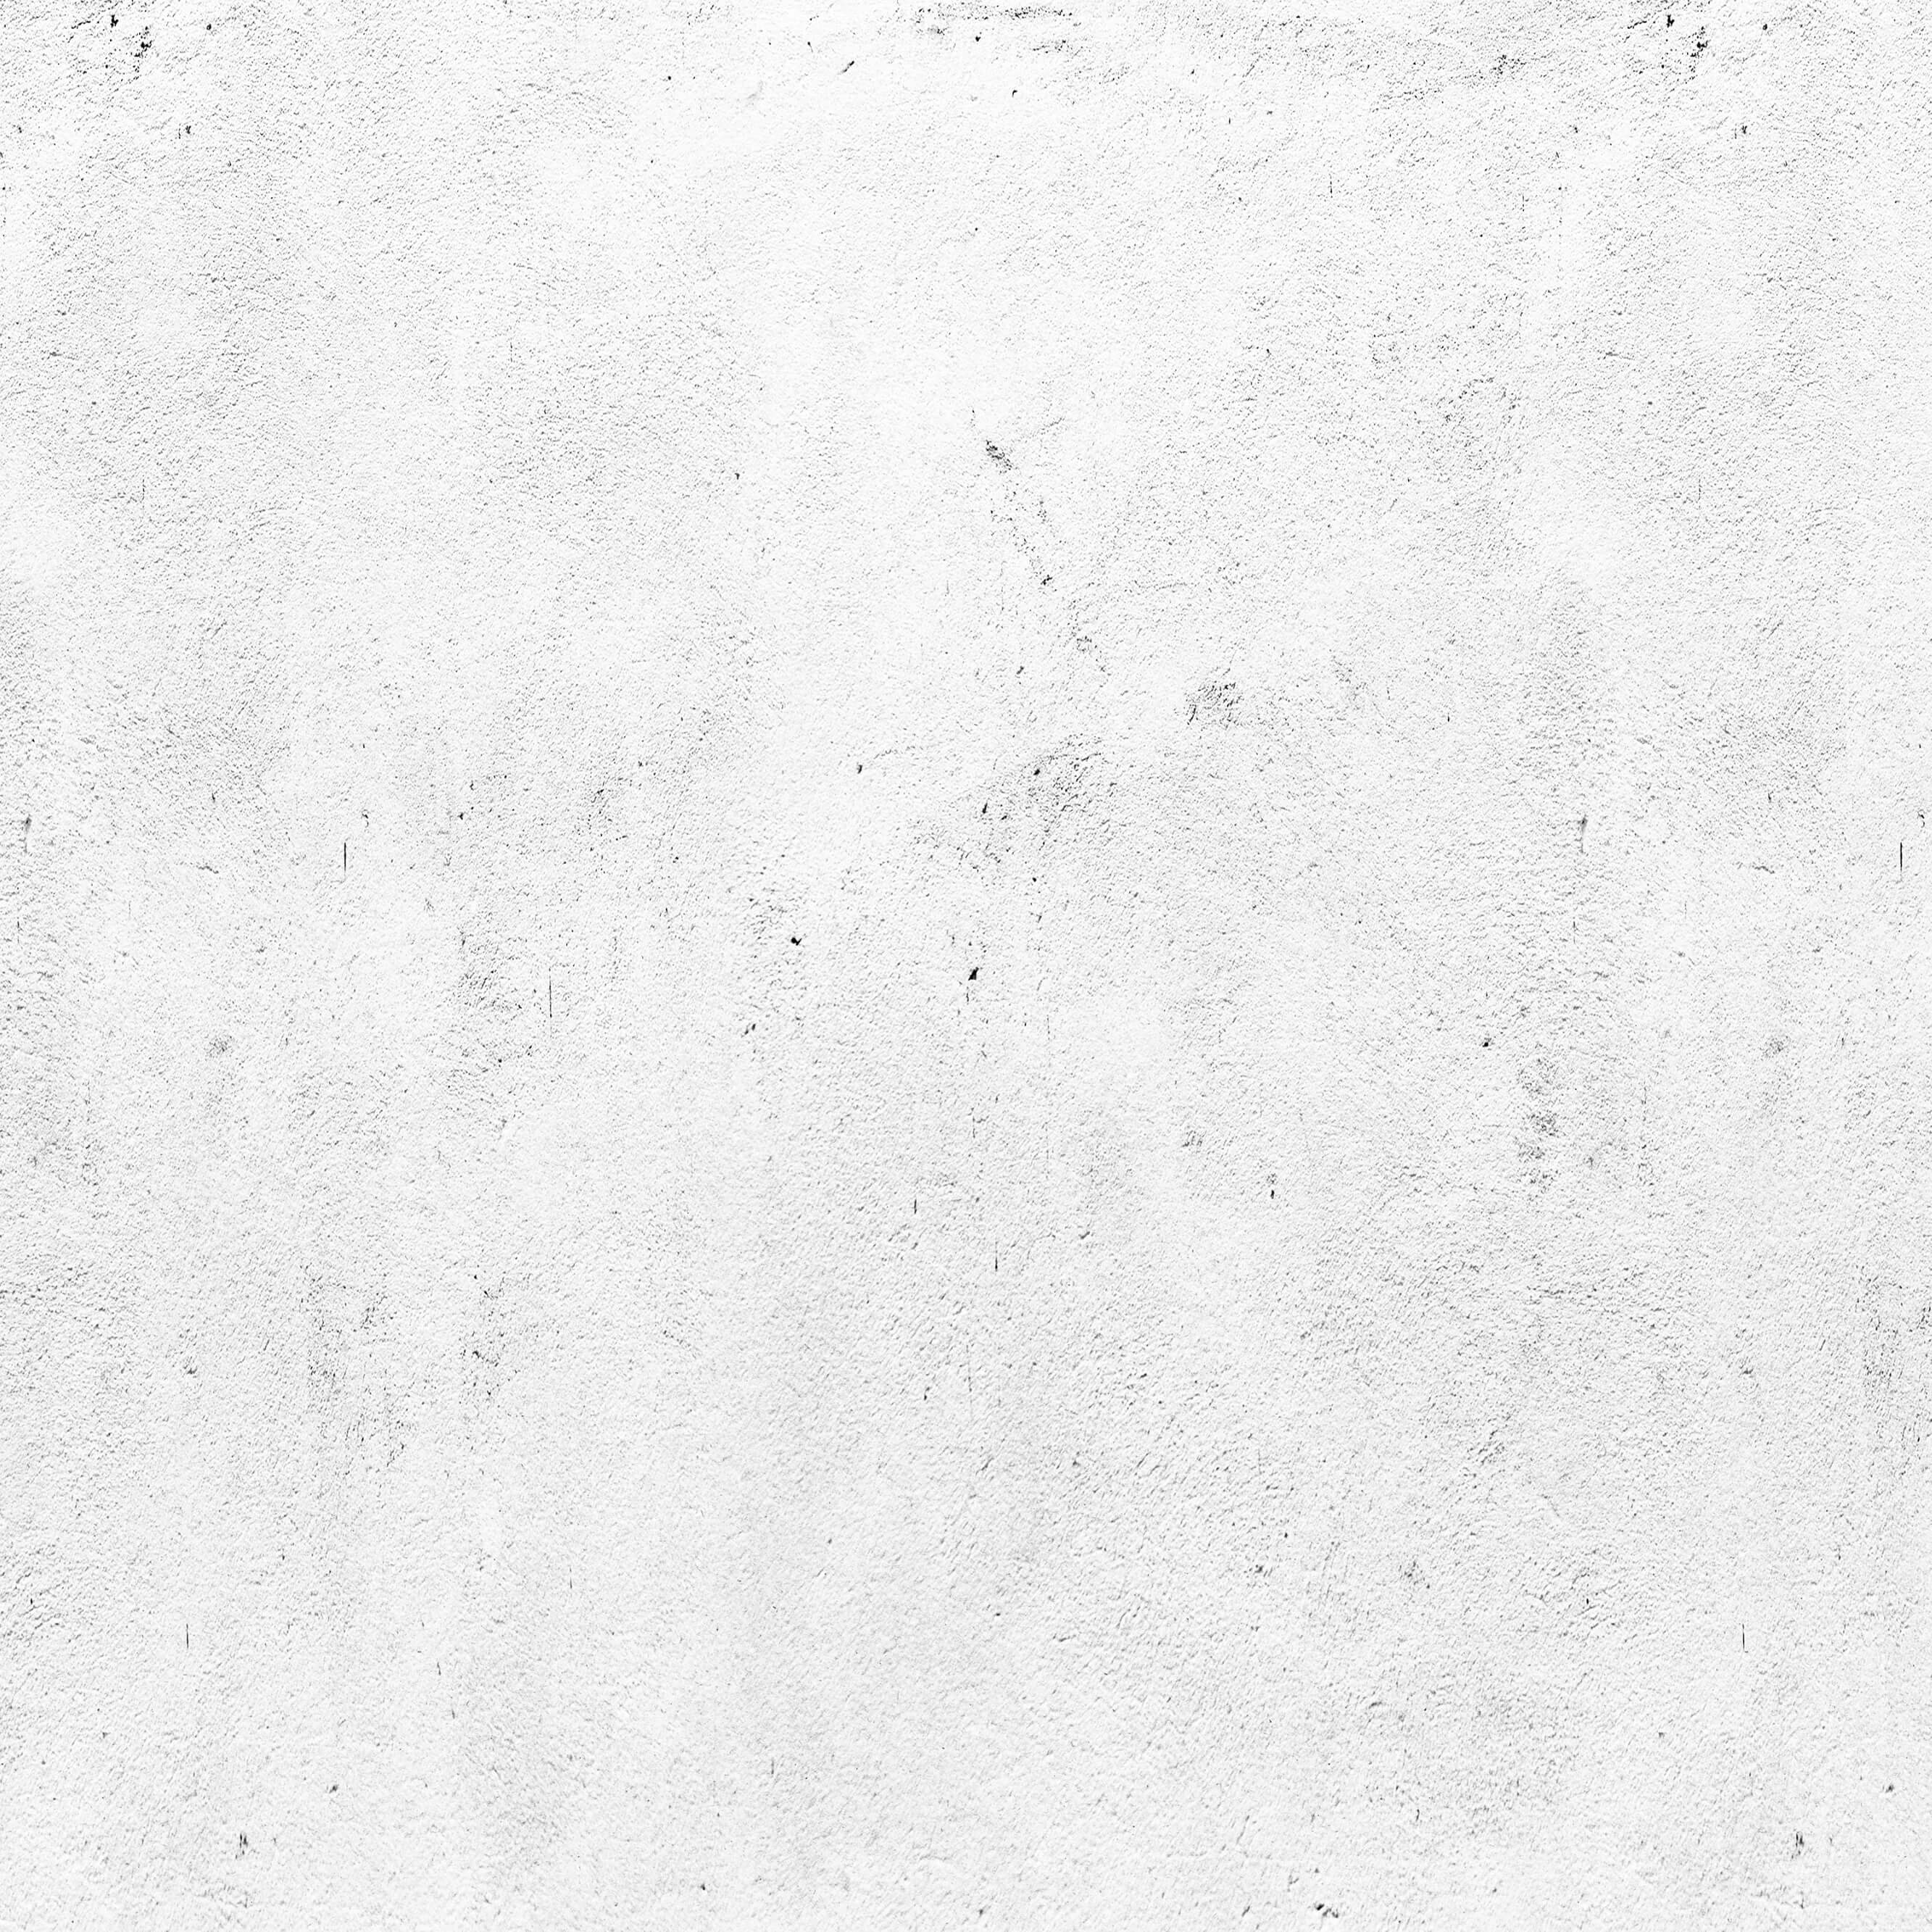 black and white backgrounds for photoshop